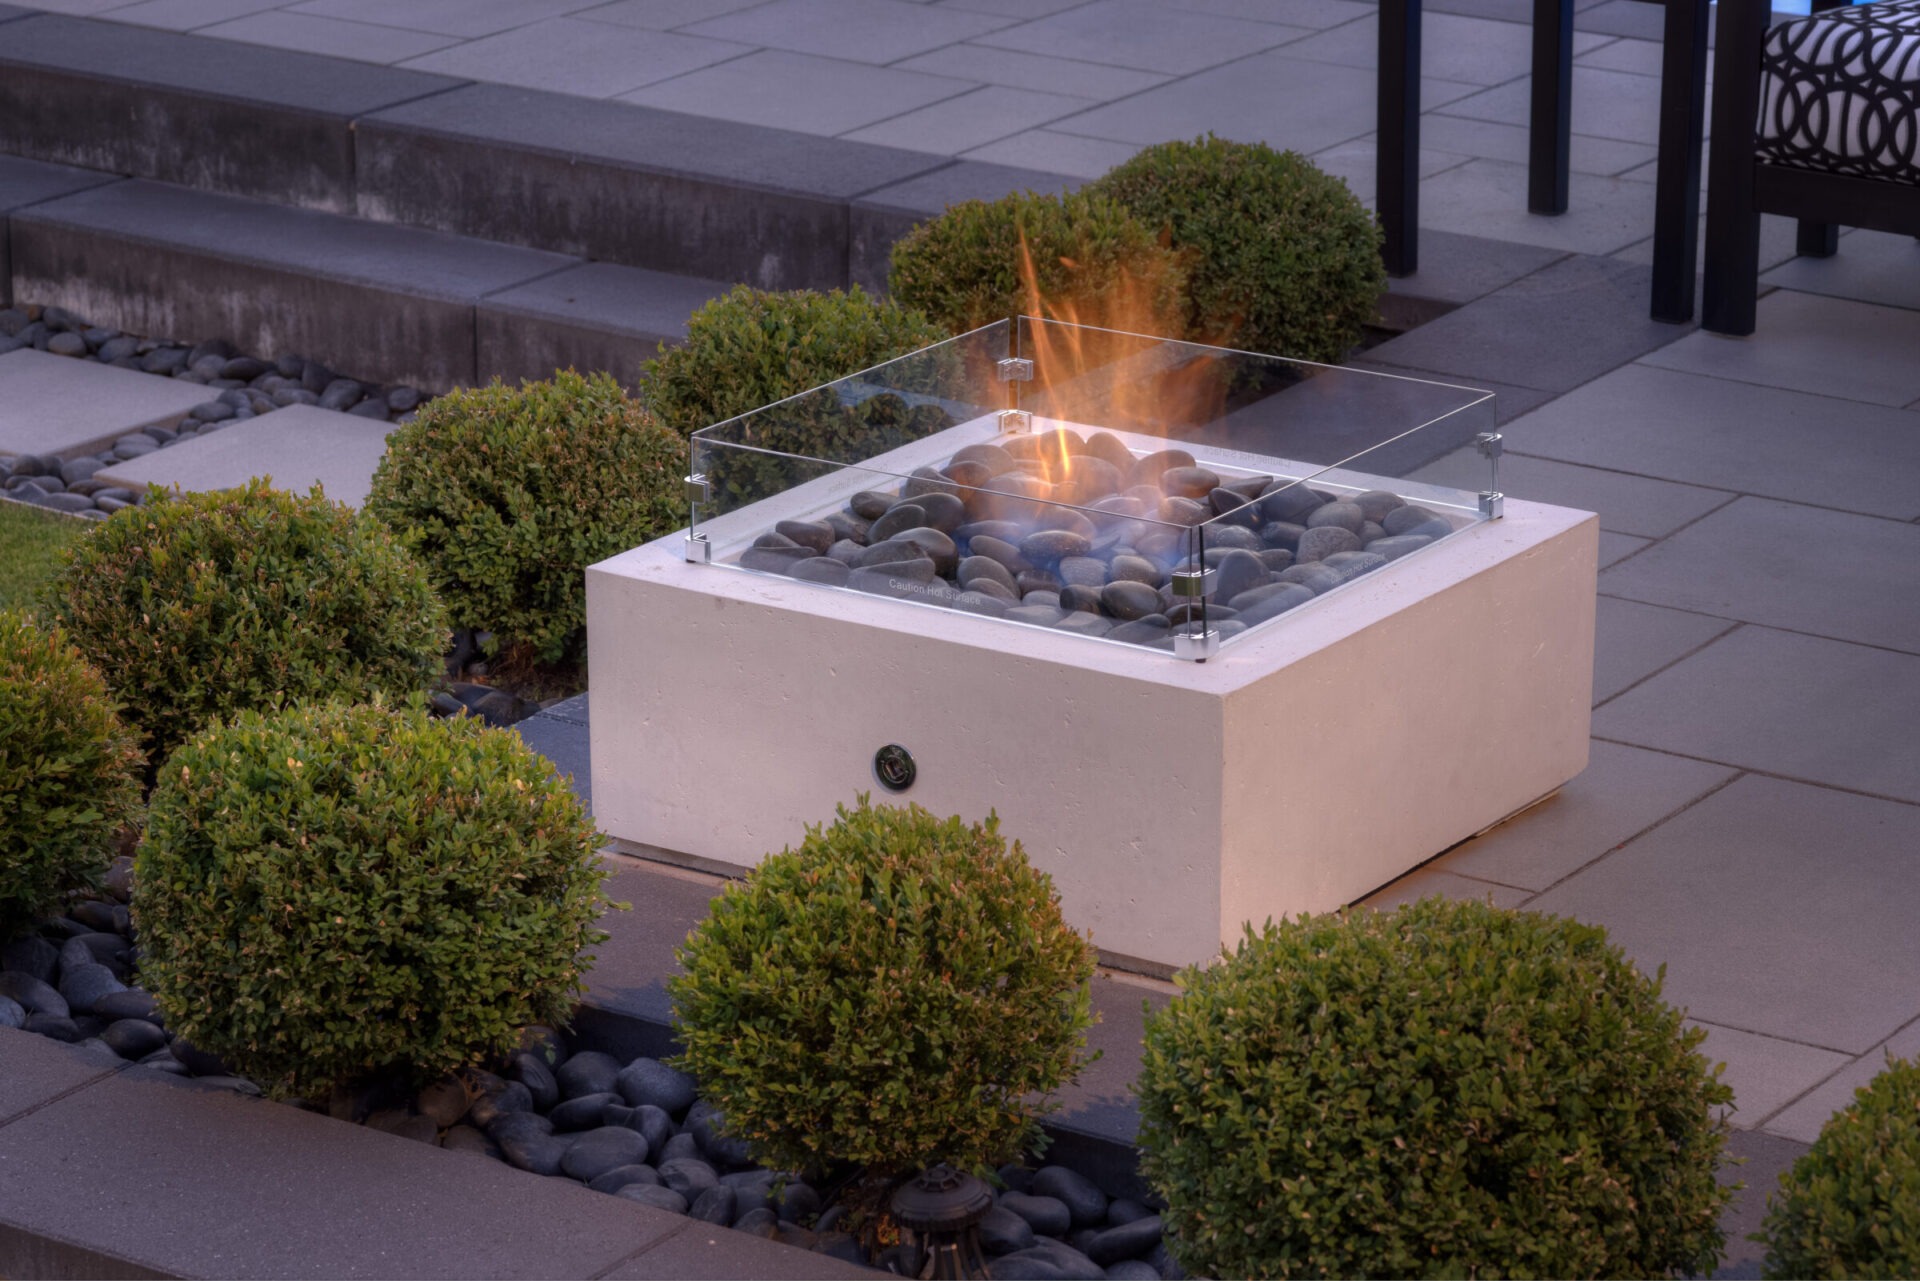 An outdoor gas fire pit with a glass shield surrounded by round bushes and smooth stones, set against a cozy patio with furniture.